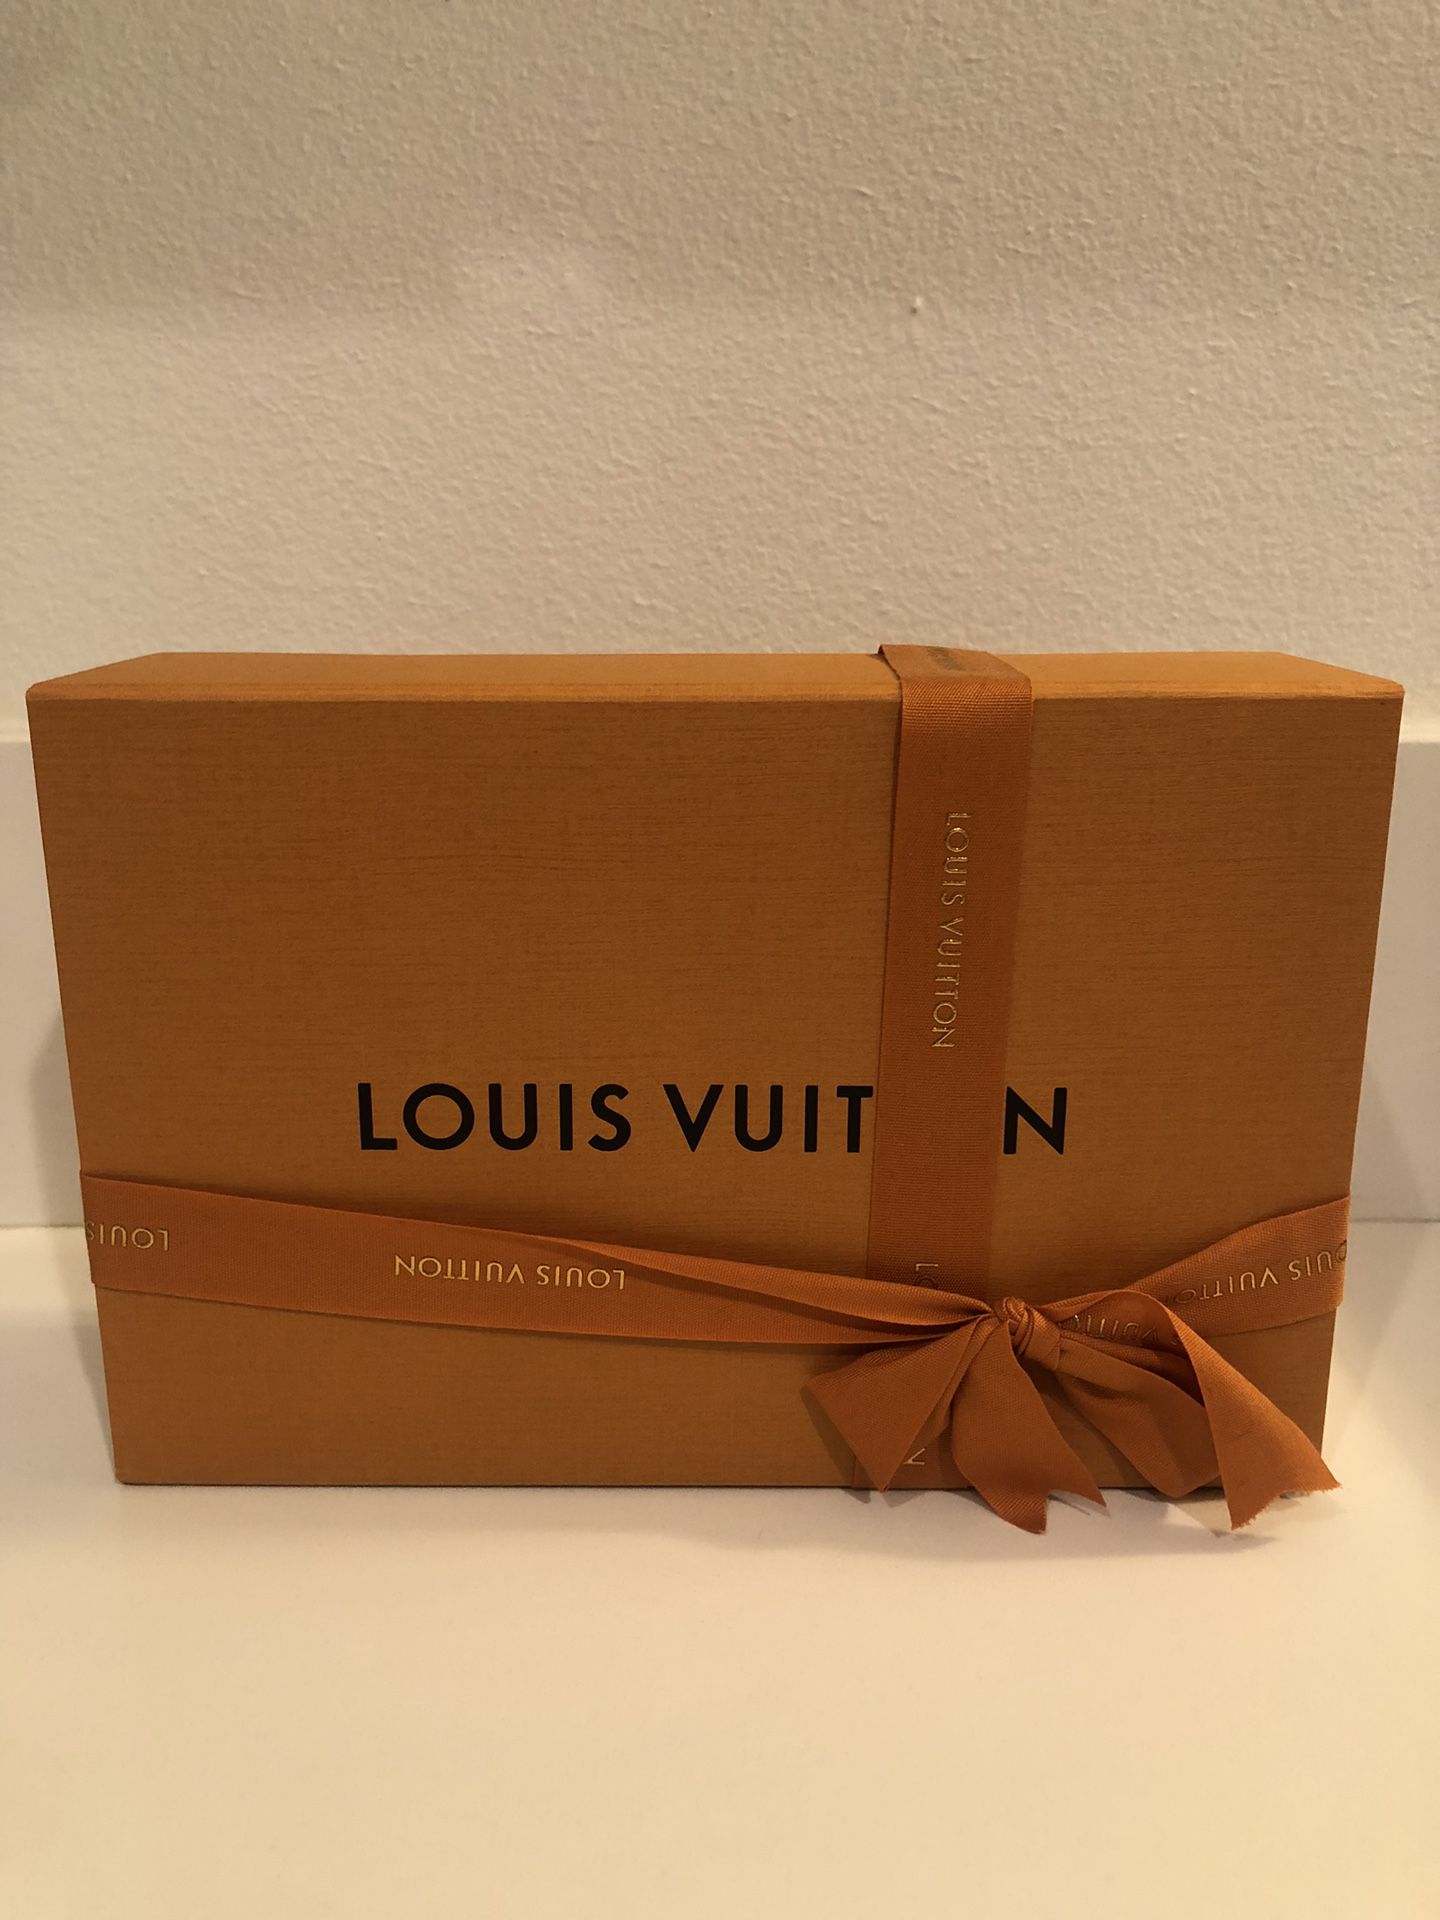 Louis Vuitton Gift Box & Bow for Sale in Los Angeles, CA - OfferUp